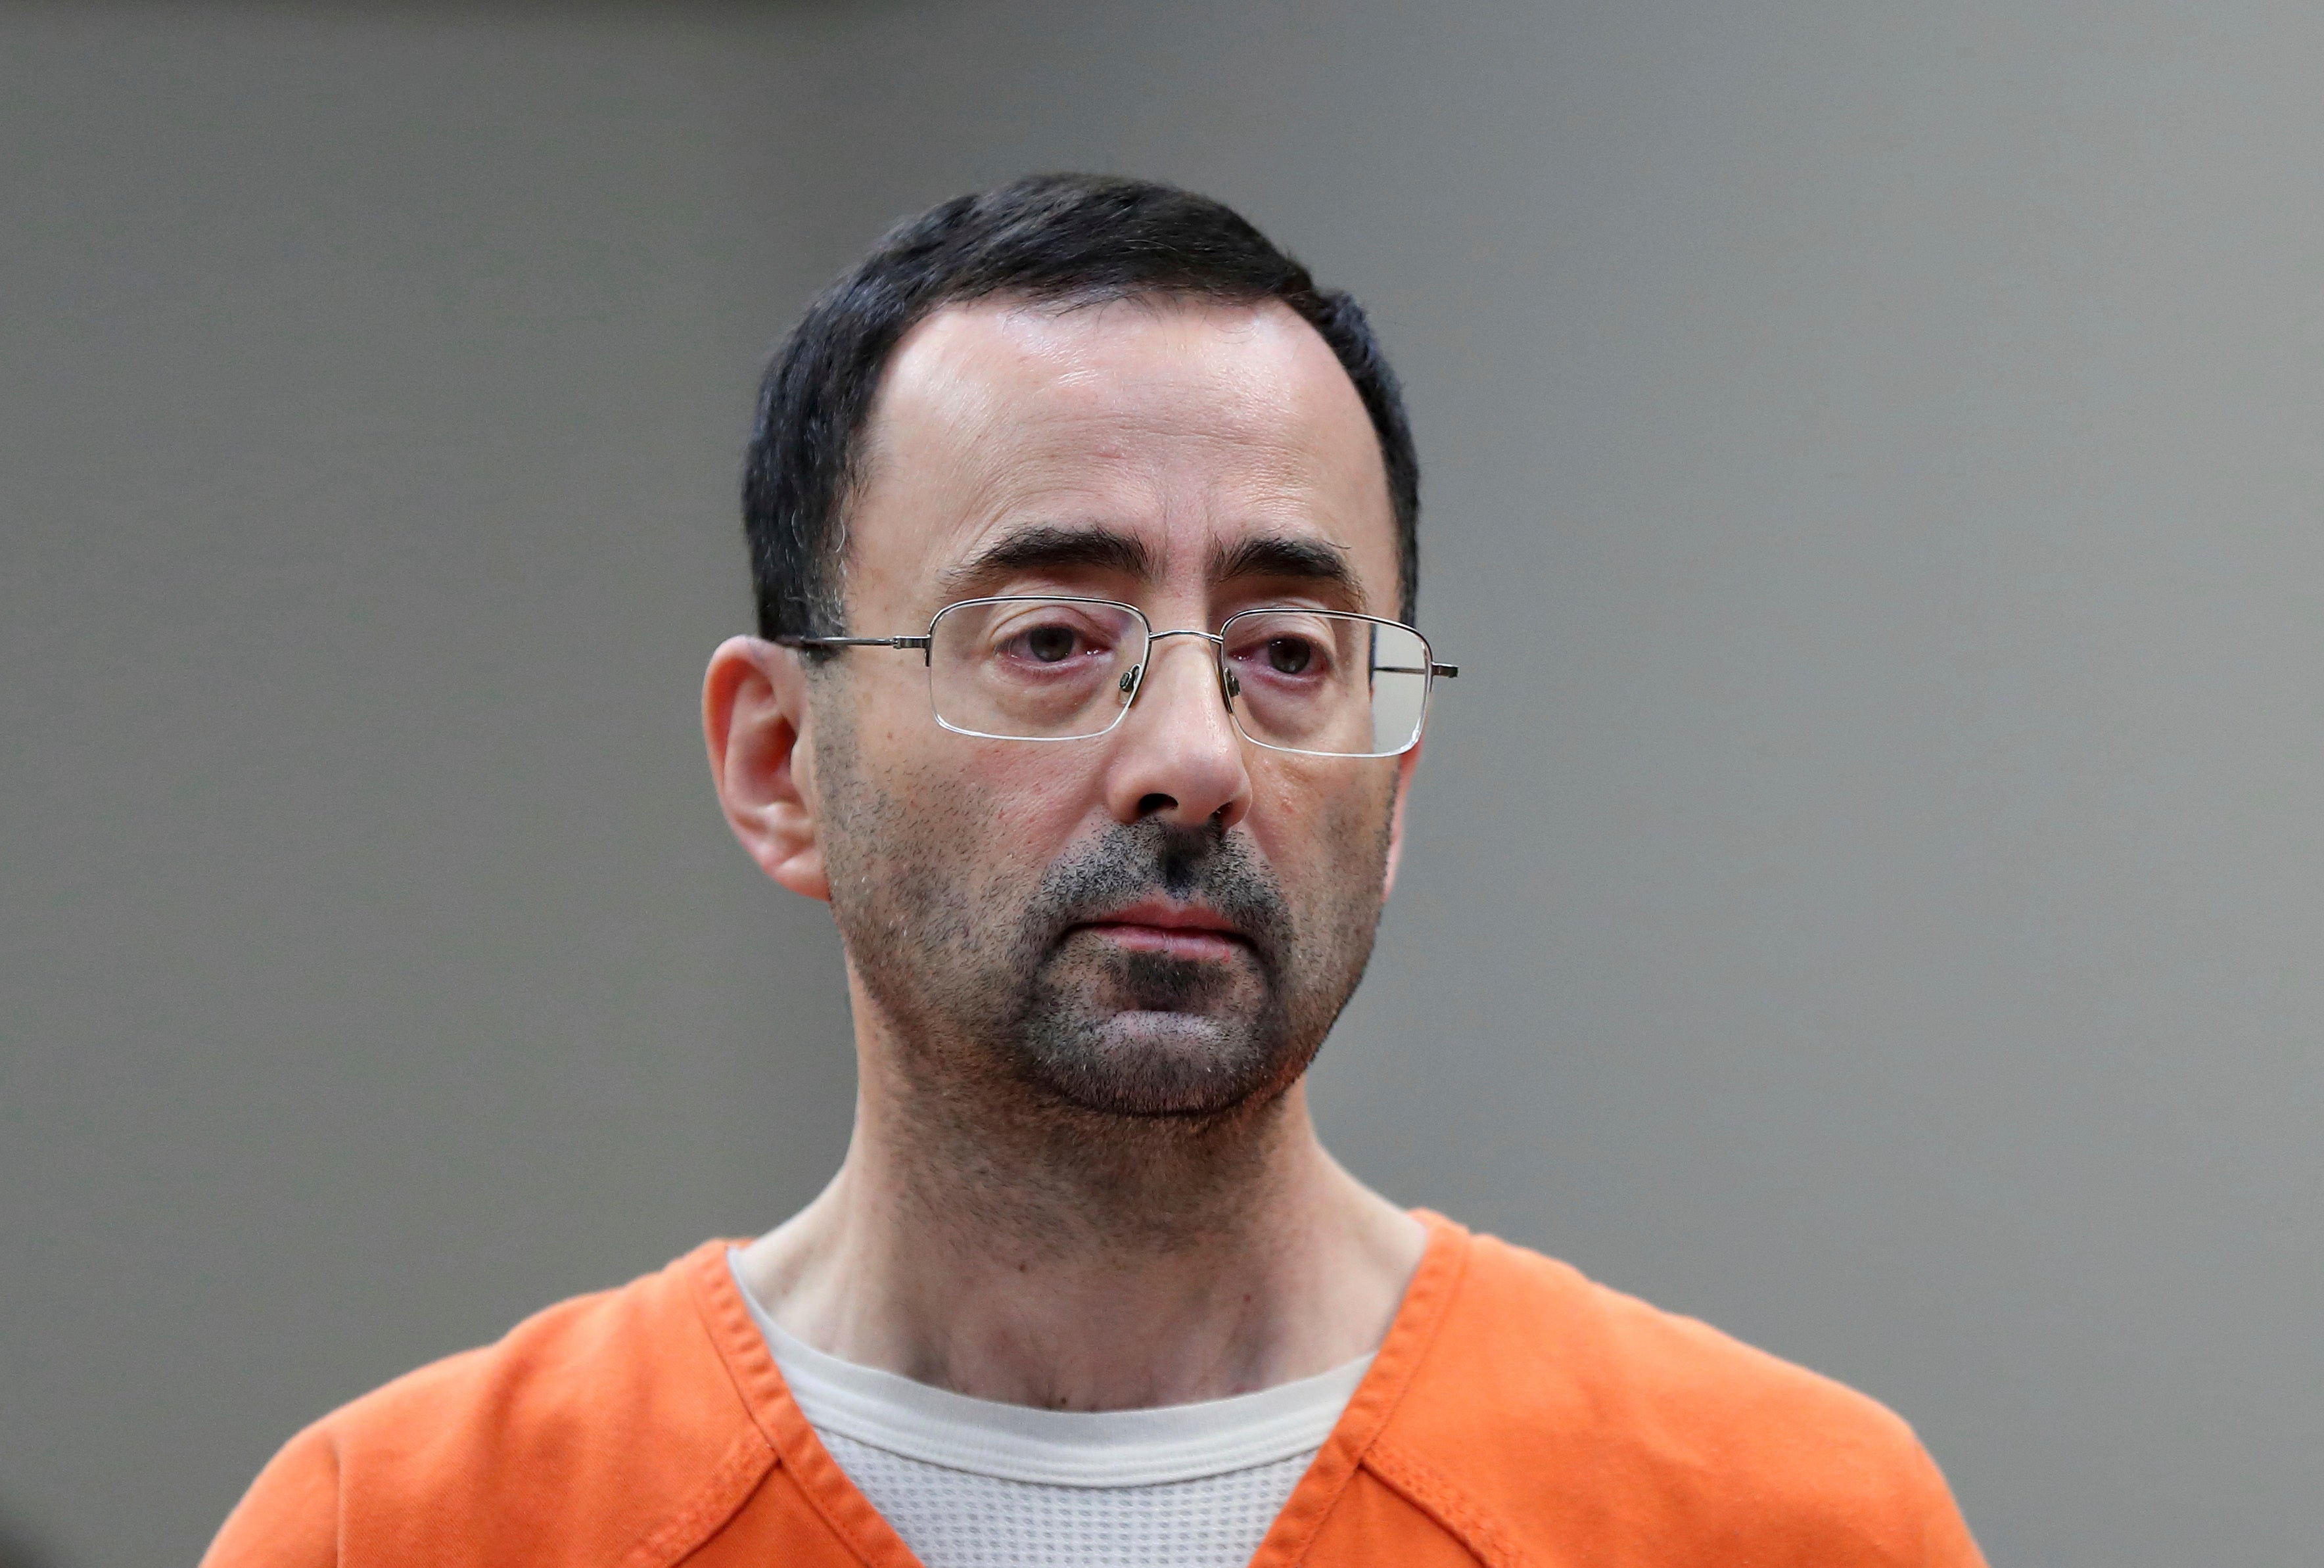 Nassar was sentenced to between 40 and 175 years in prison in 2017, for abusing athletes in his care after the court heard testimony from nearly 160 of his victims